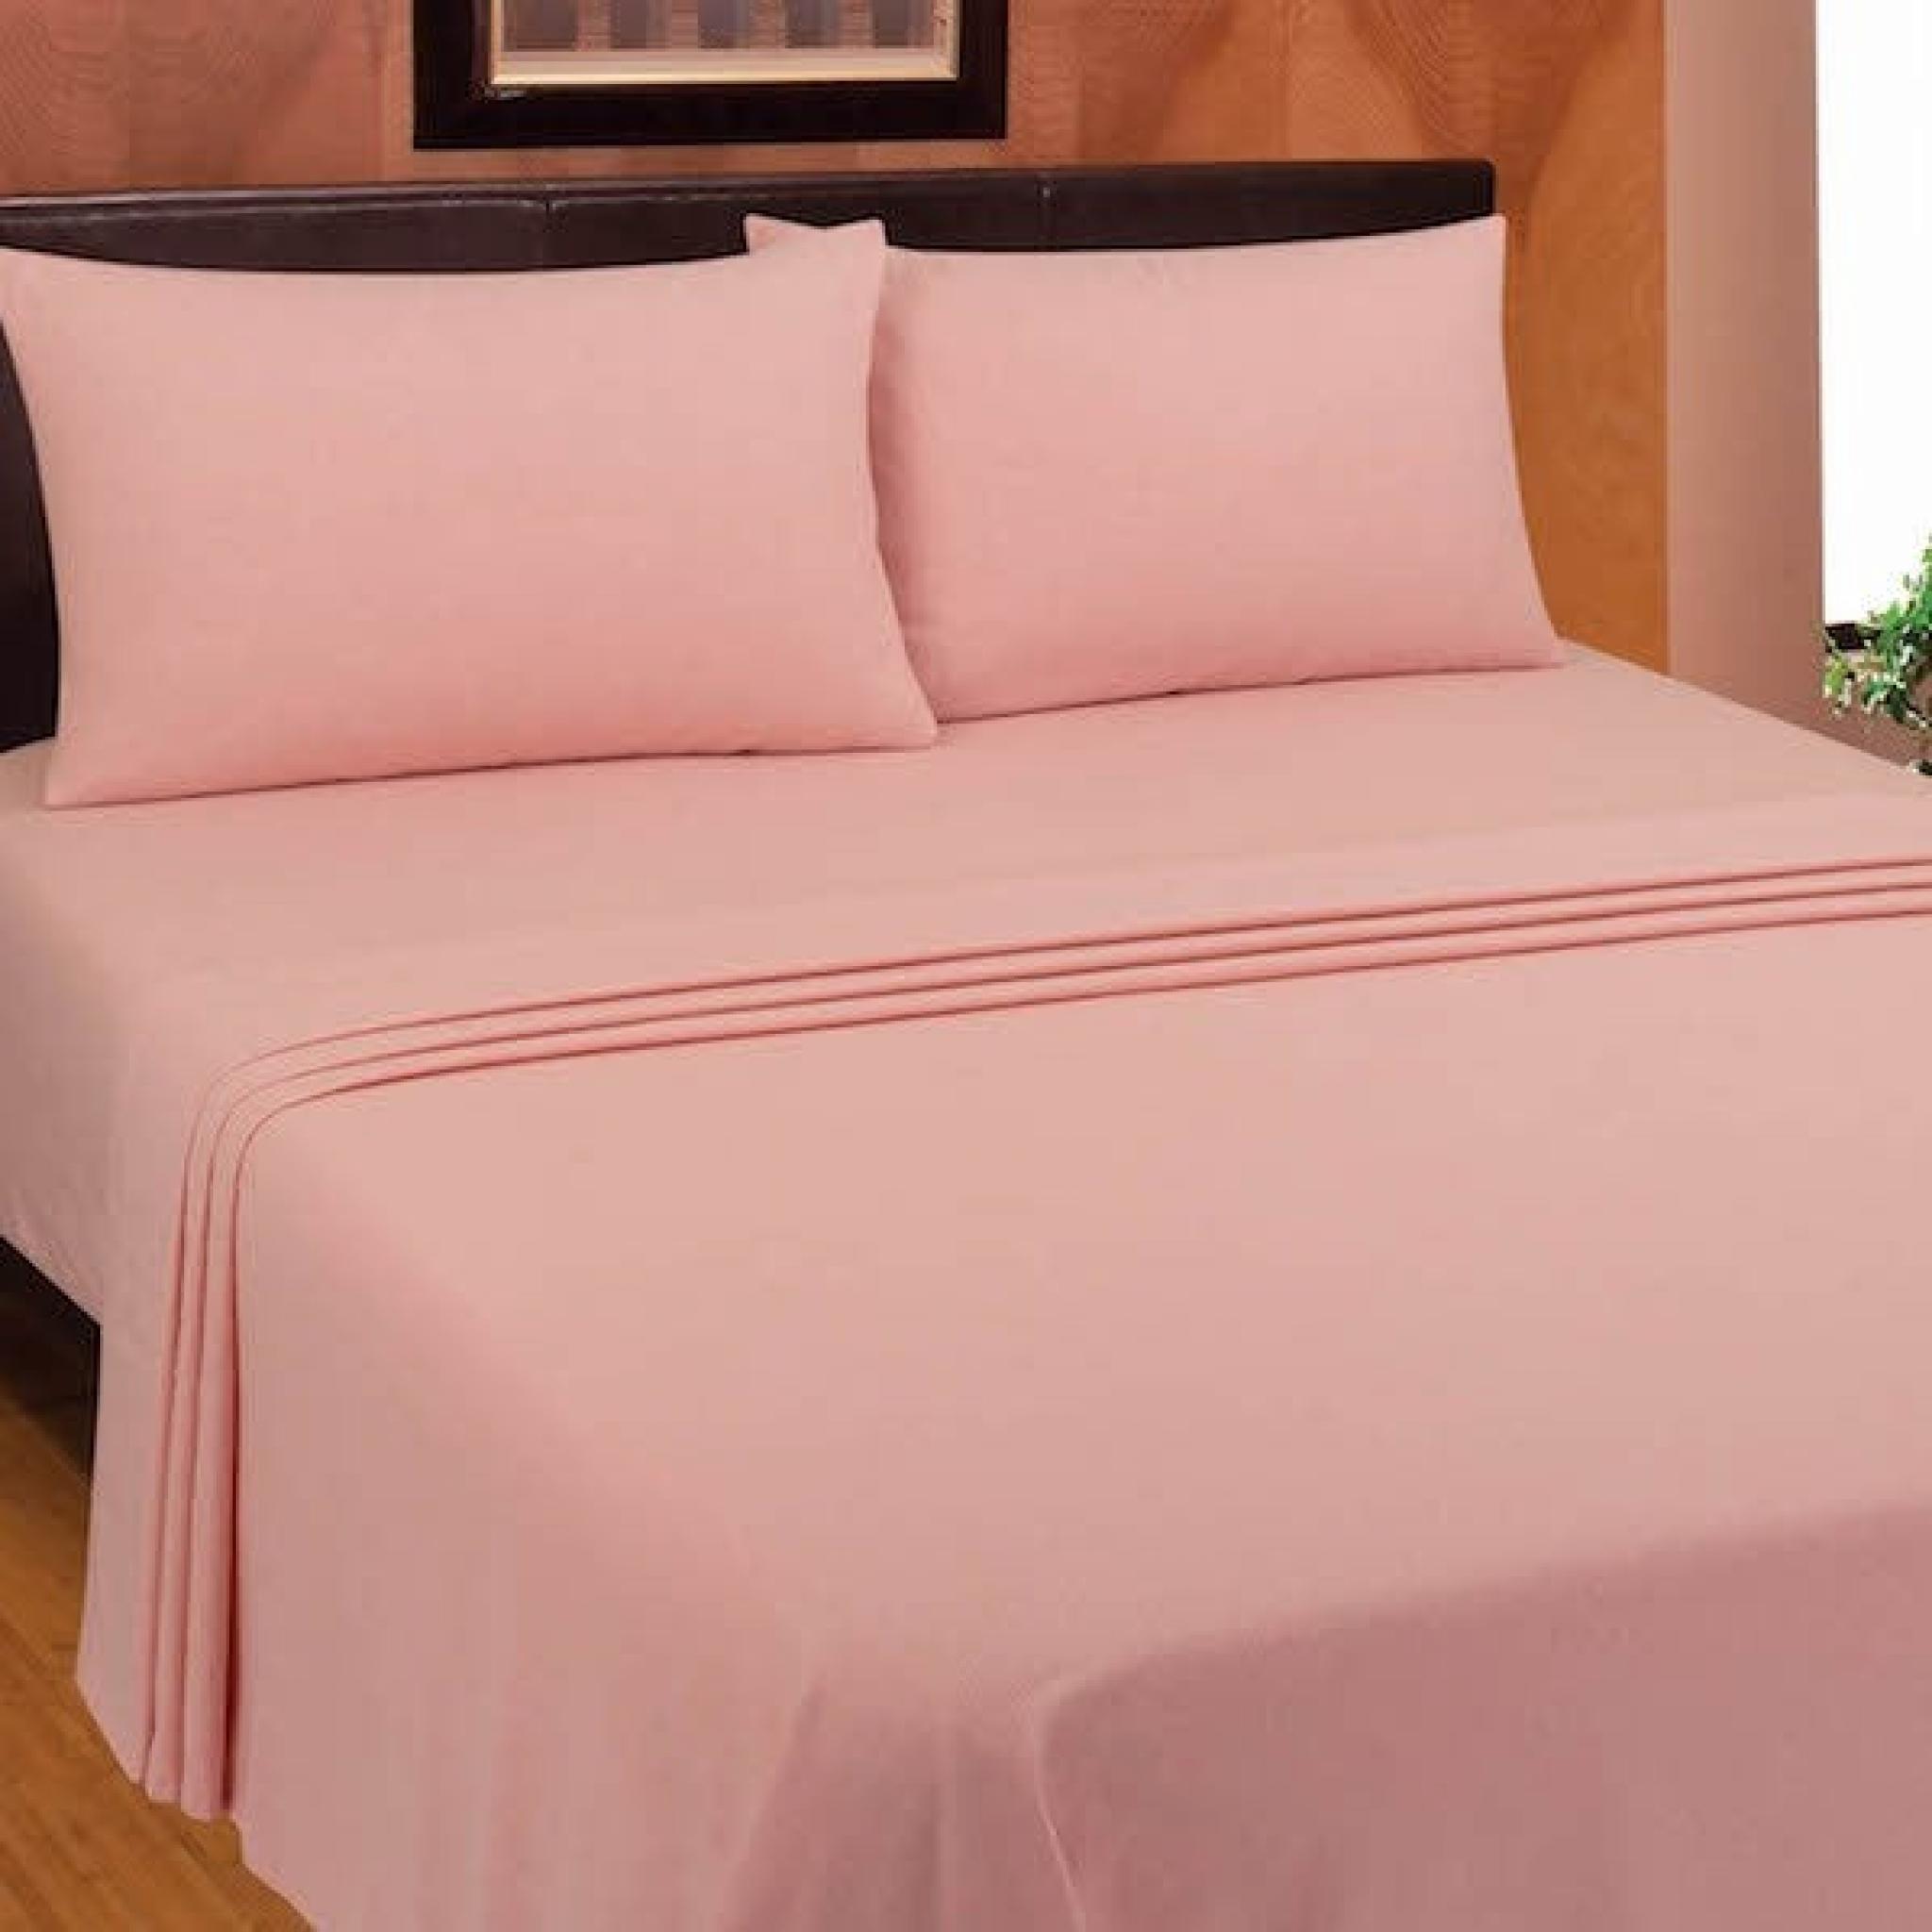 Polycotton mattress protector for 2'6 x 6'3 bed 75cm x 190cm bed 10" depth 